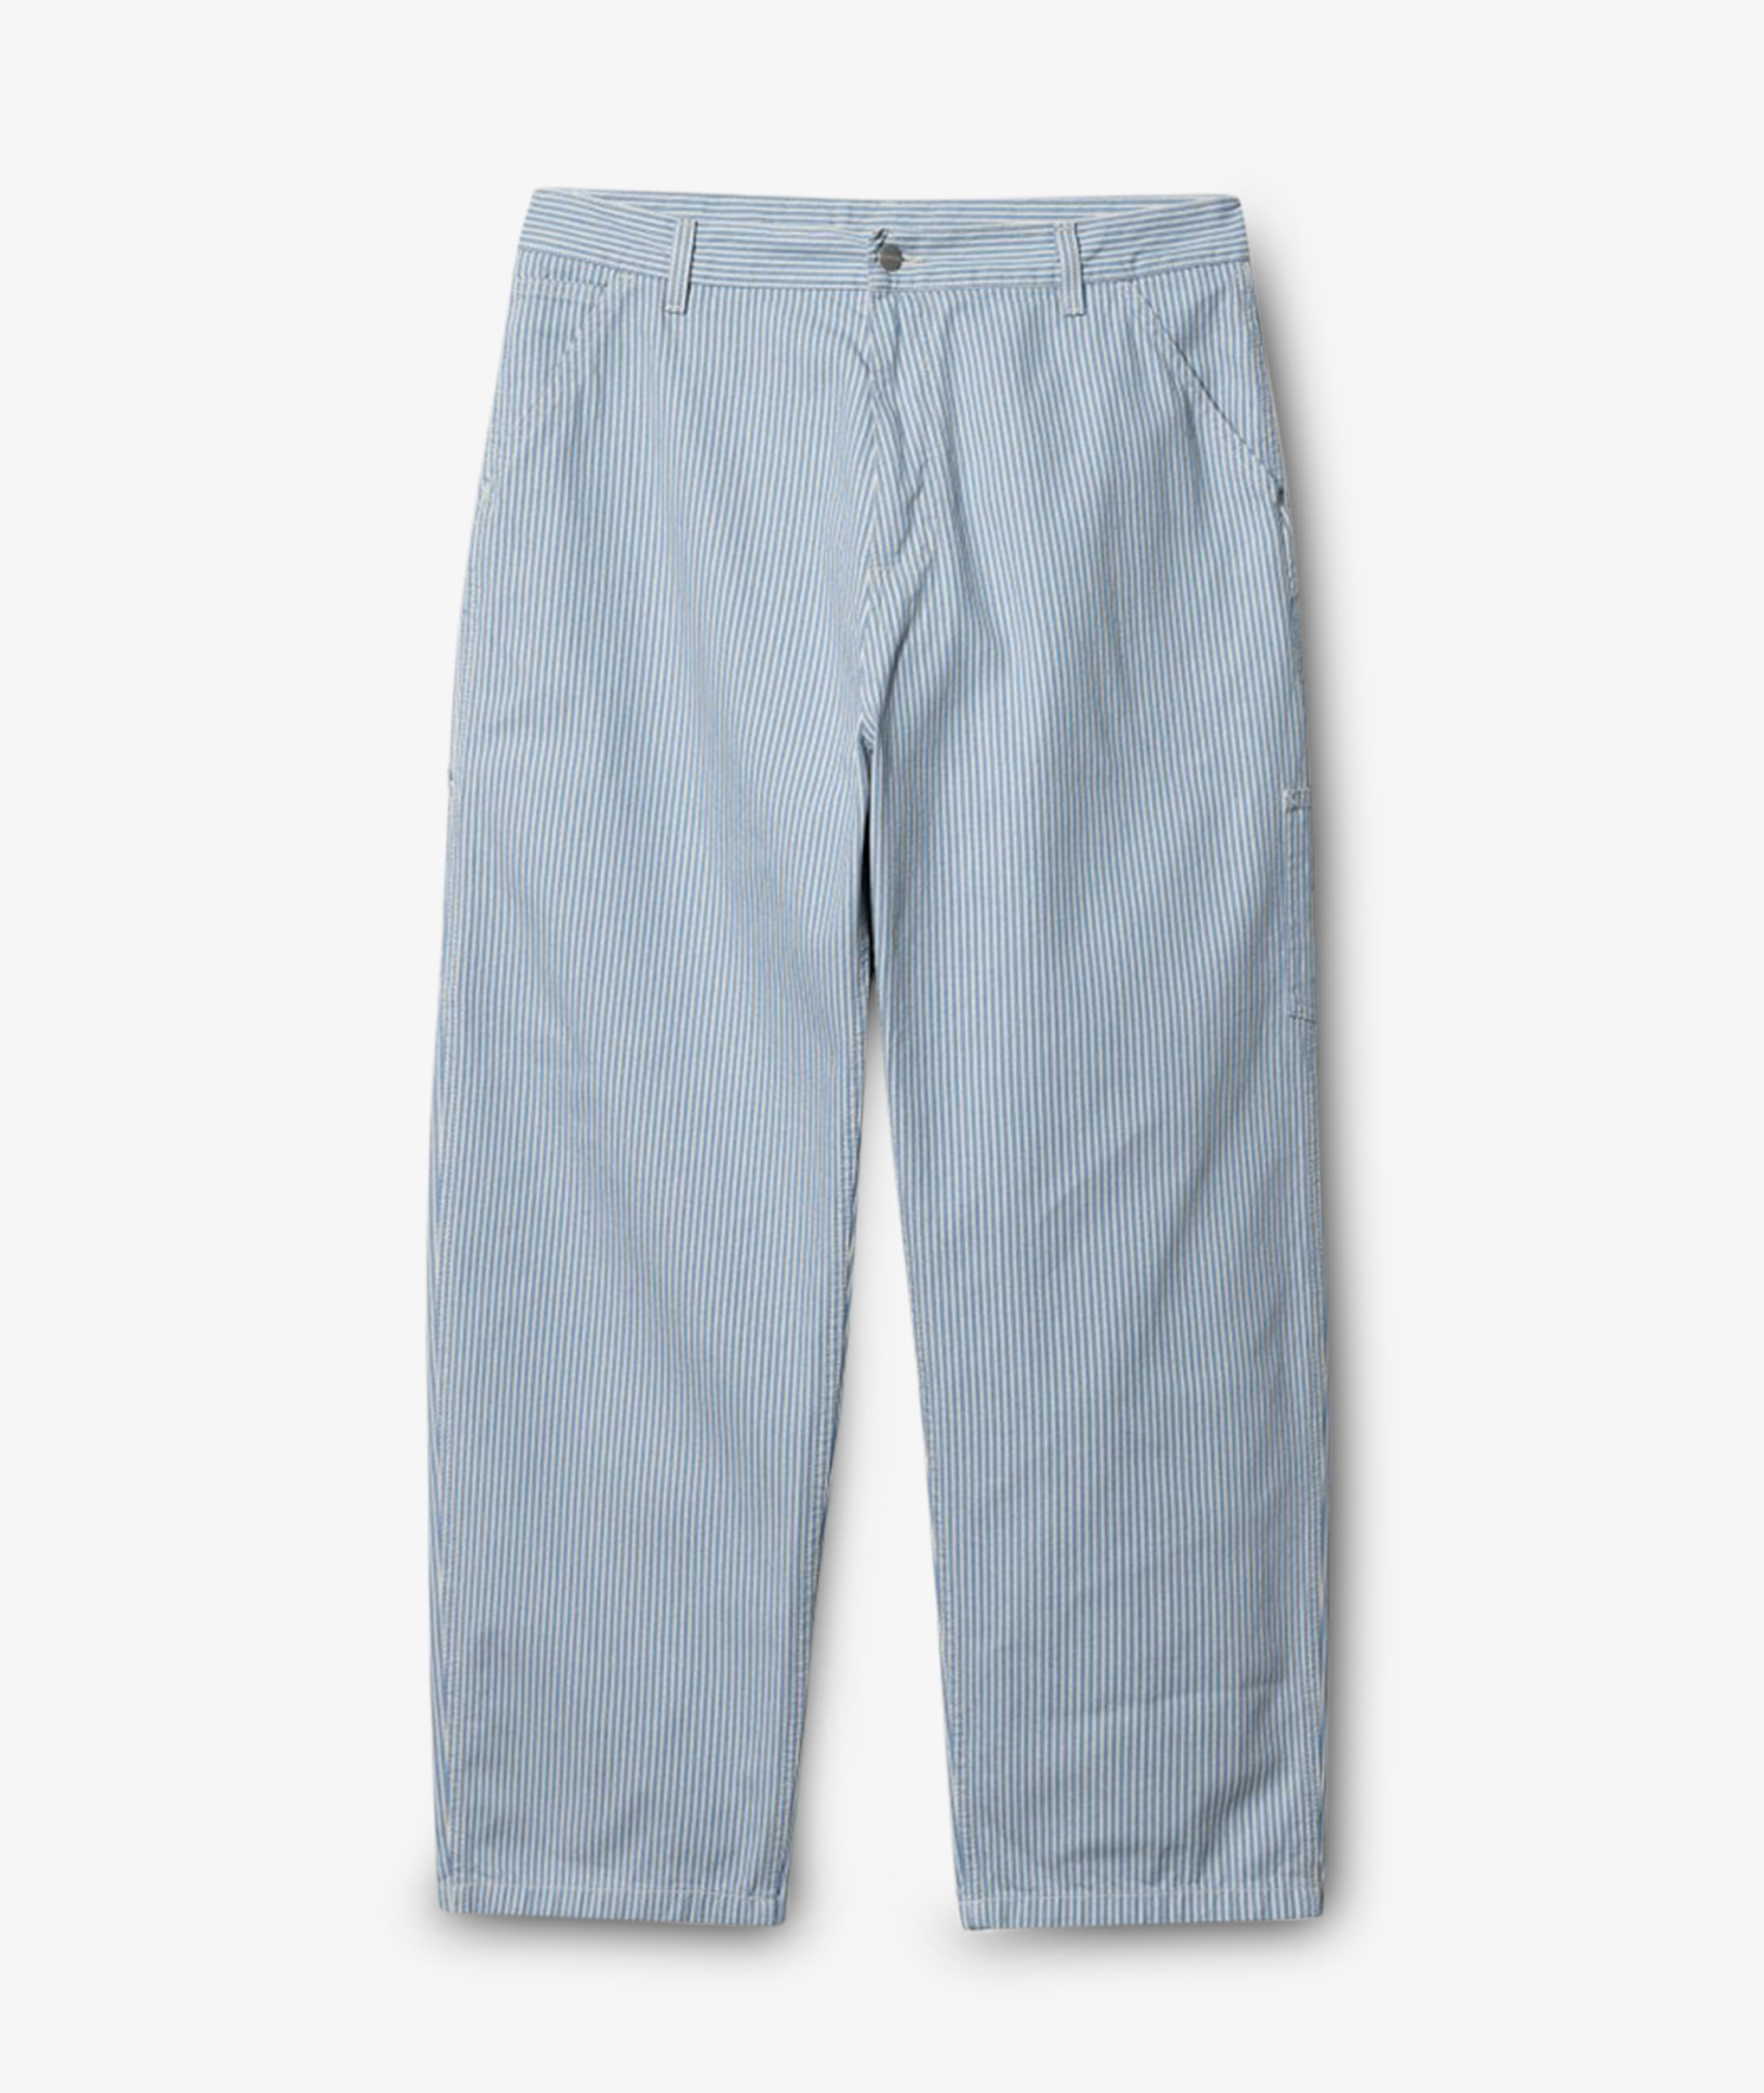 Norse Store | Shipping Worldwide - Carhartt WIP Terrell SK Pant ...